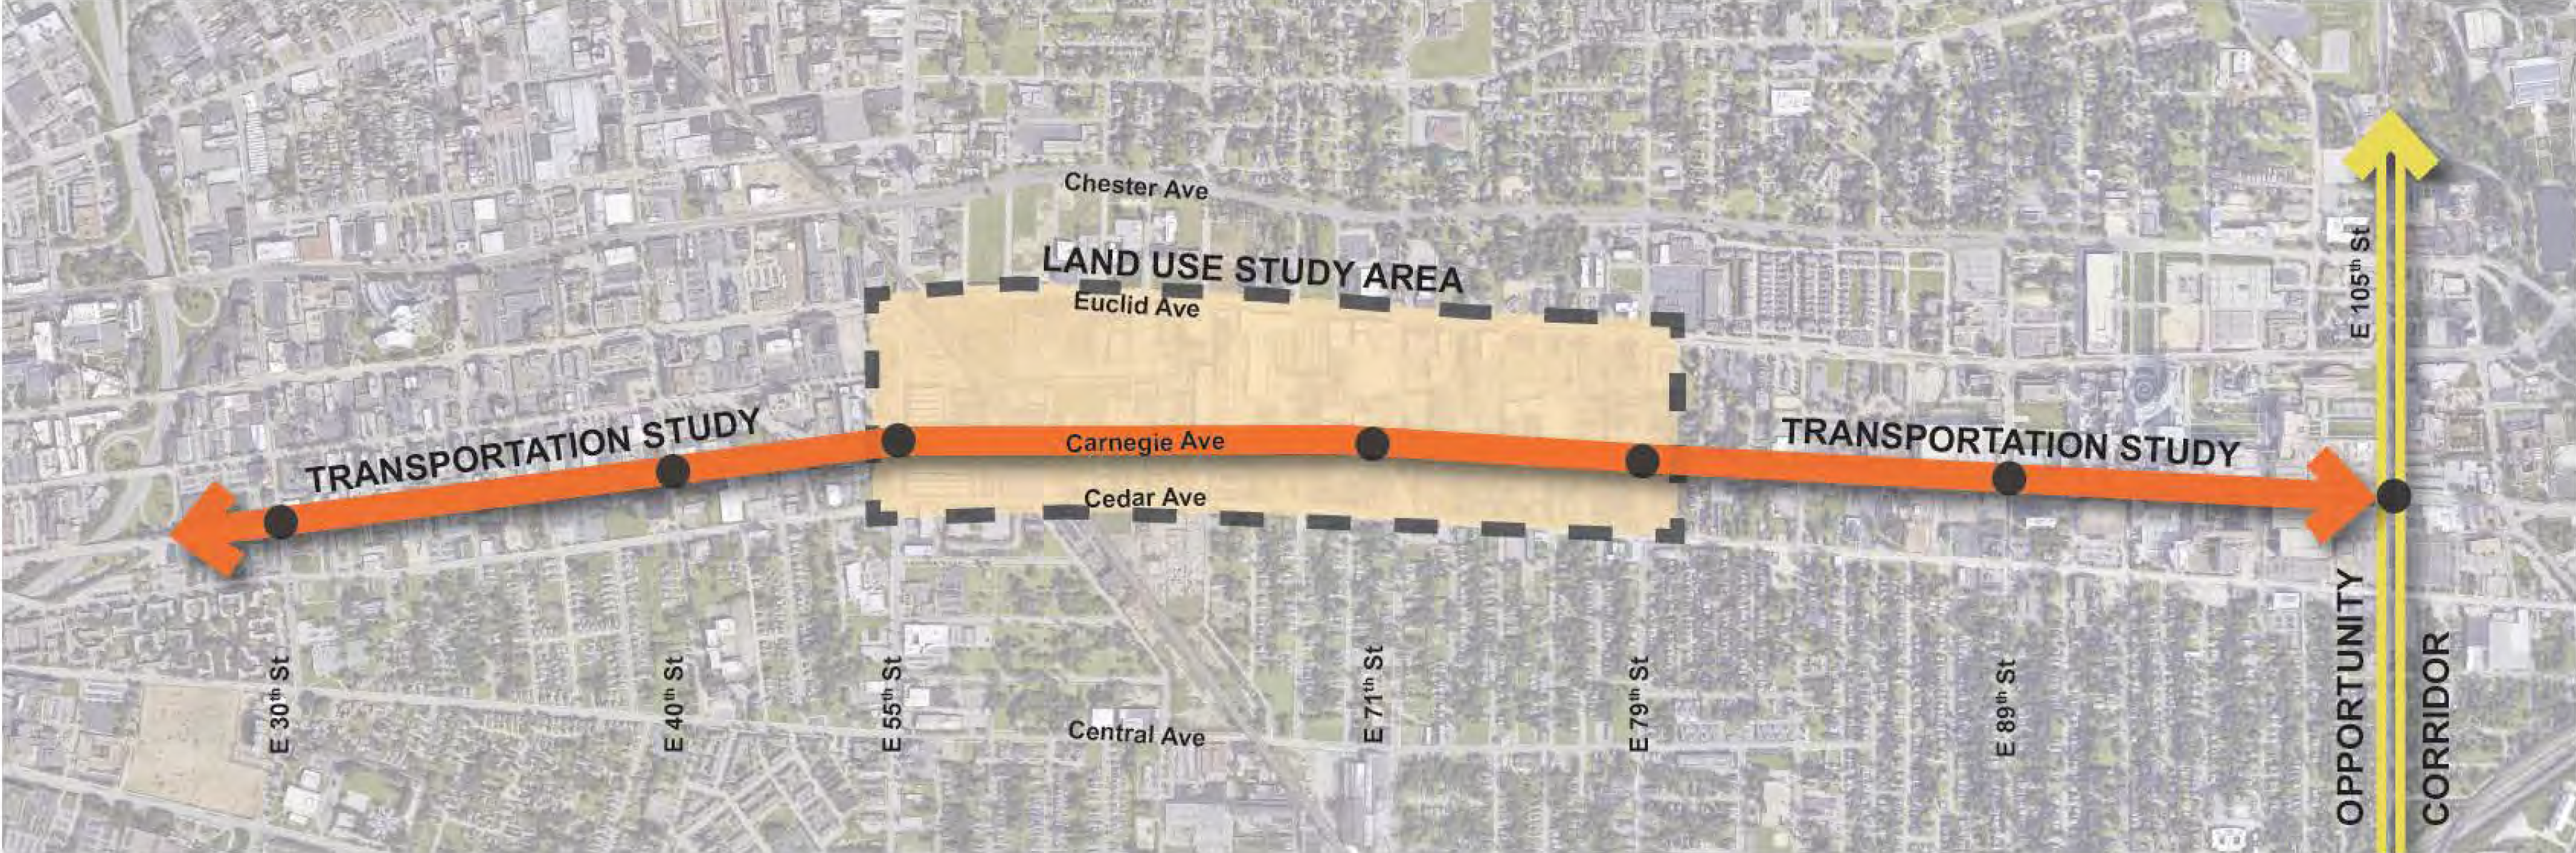 The Carnegie Avenue Corridor Study will analyze transportation conditions from the Innerbelt to E. 105th St. 
A future land use component will focus on the area between E. 55th and E 79th St.